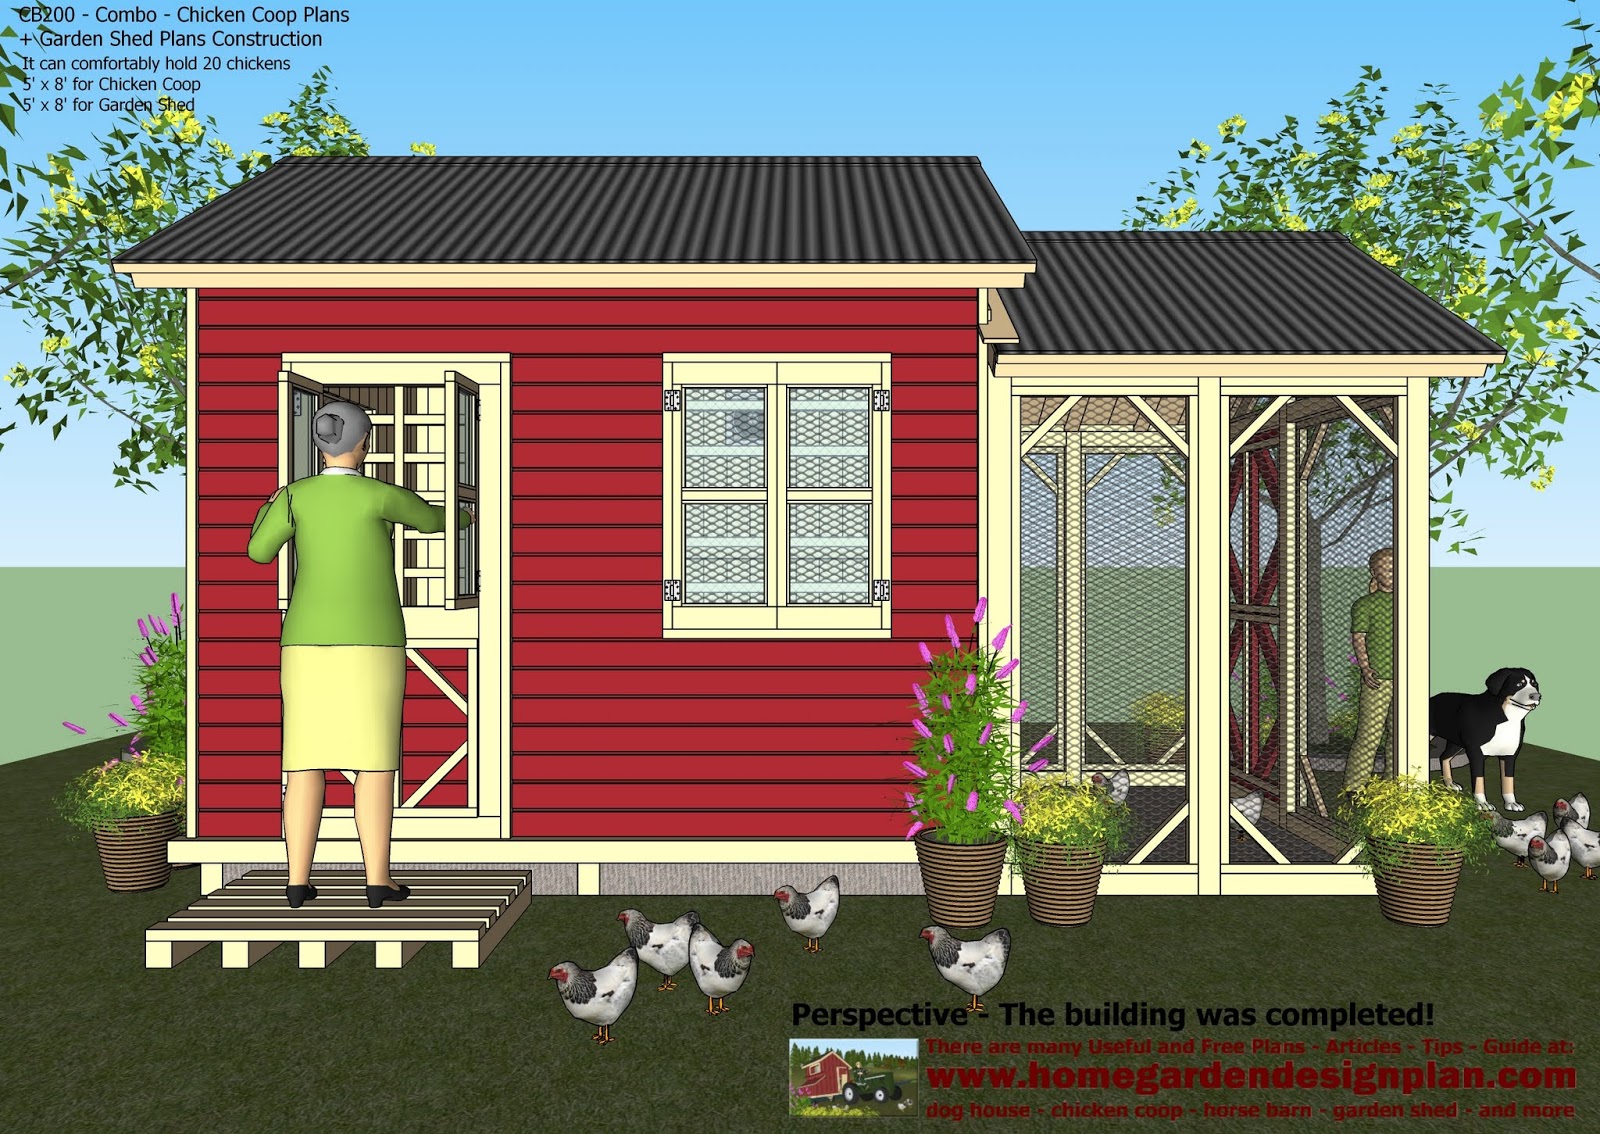 CB200 - Combo Plans - Chicken Coop Plans Construction + Garden Sheds ...